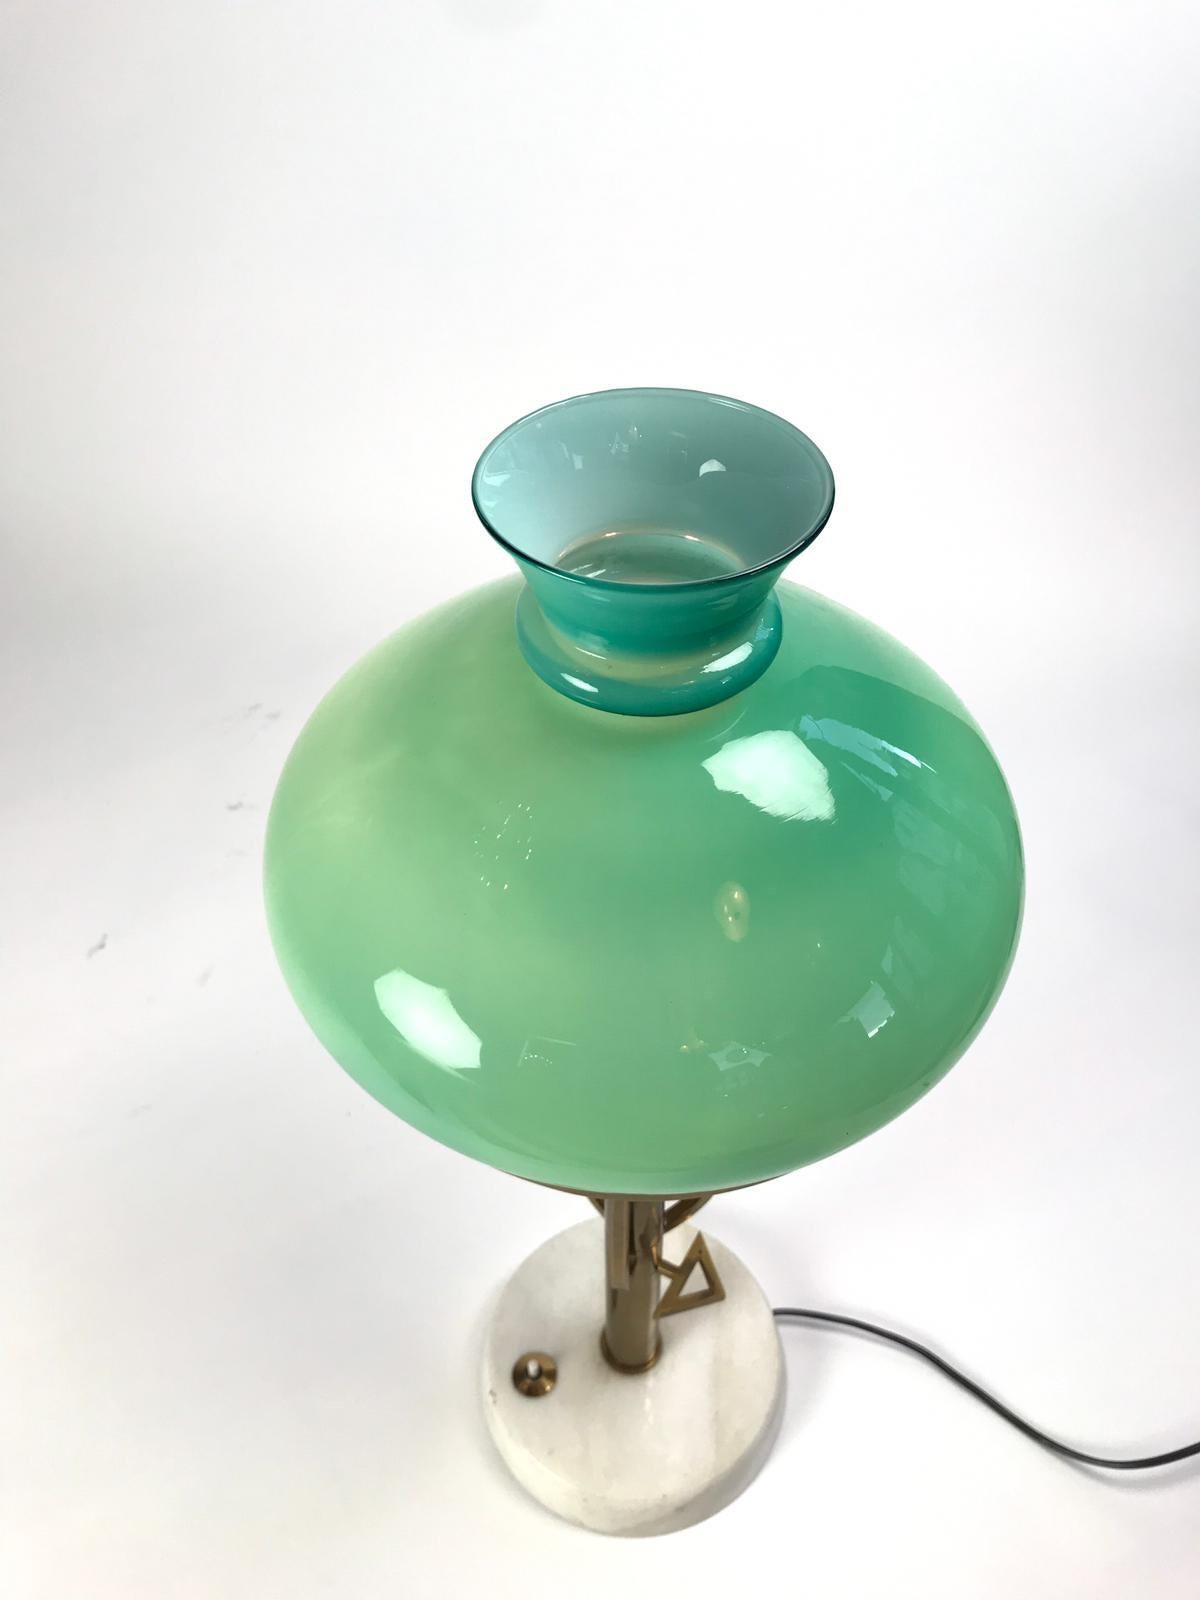 Hand-Crafted Vintage Table Lamp with Hand Blown Glass Shade Attributed to Ignazio Gardella